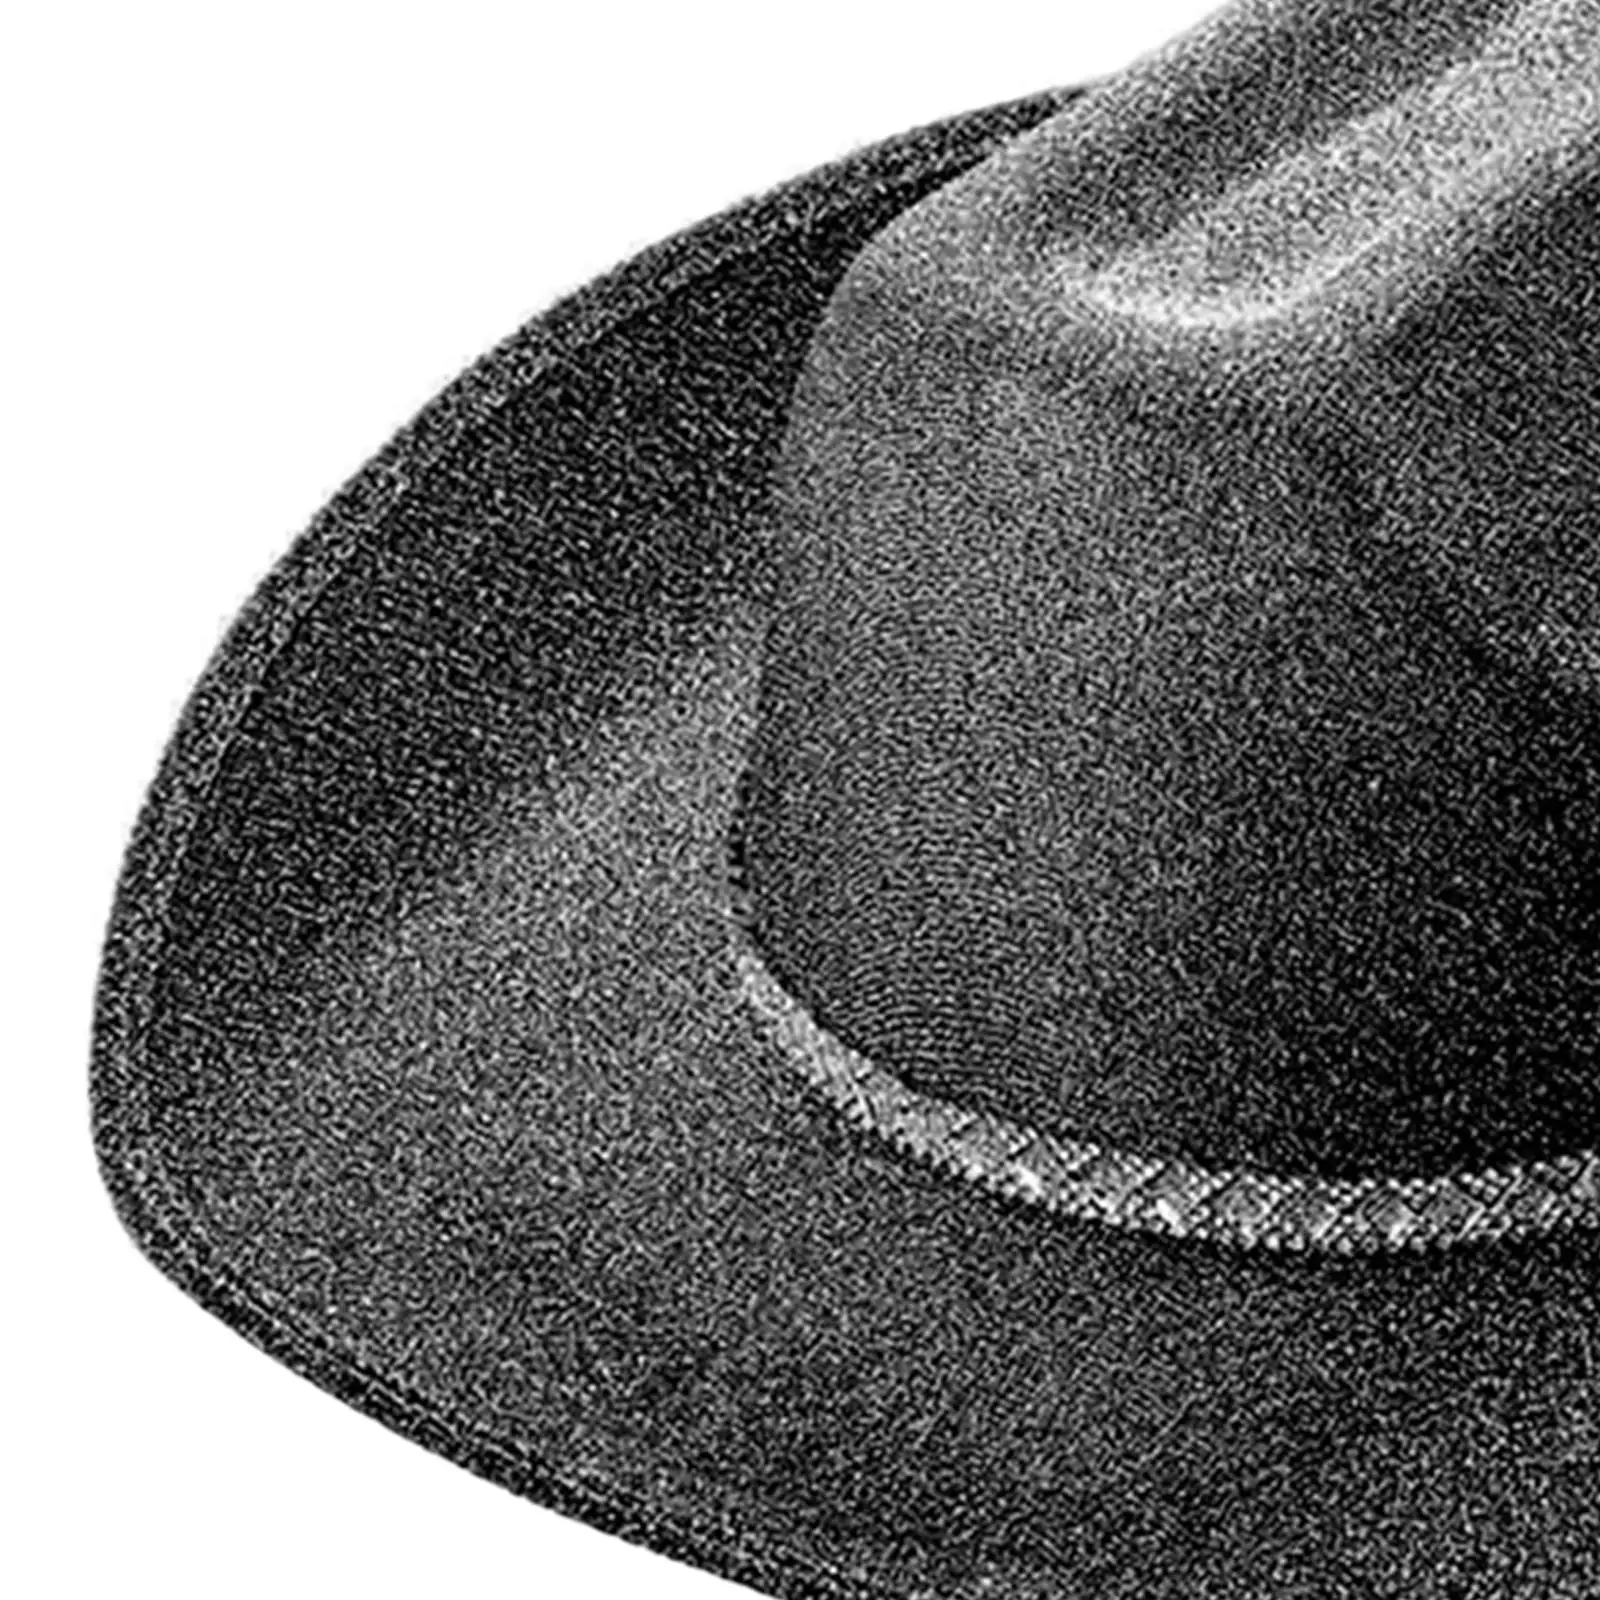 Novelty Cowgirl Hat Fedoras Caps Jazz Hat Diamond Bar Sunhat Wide Brim Party Hats Western for Winter Costume Gift Halloween Boys